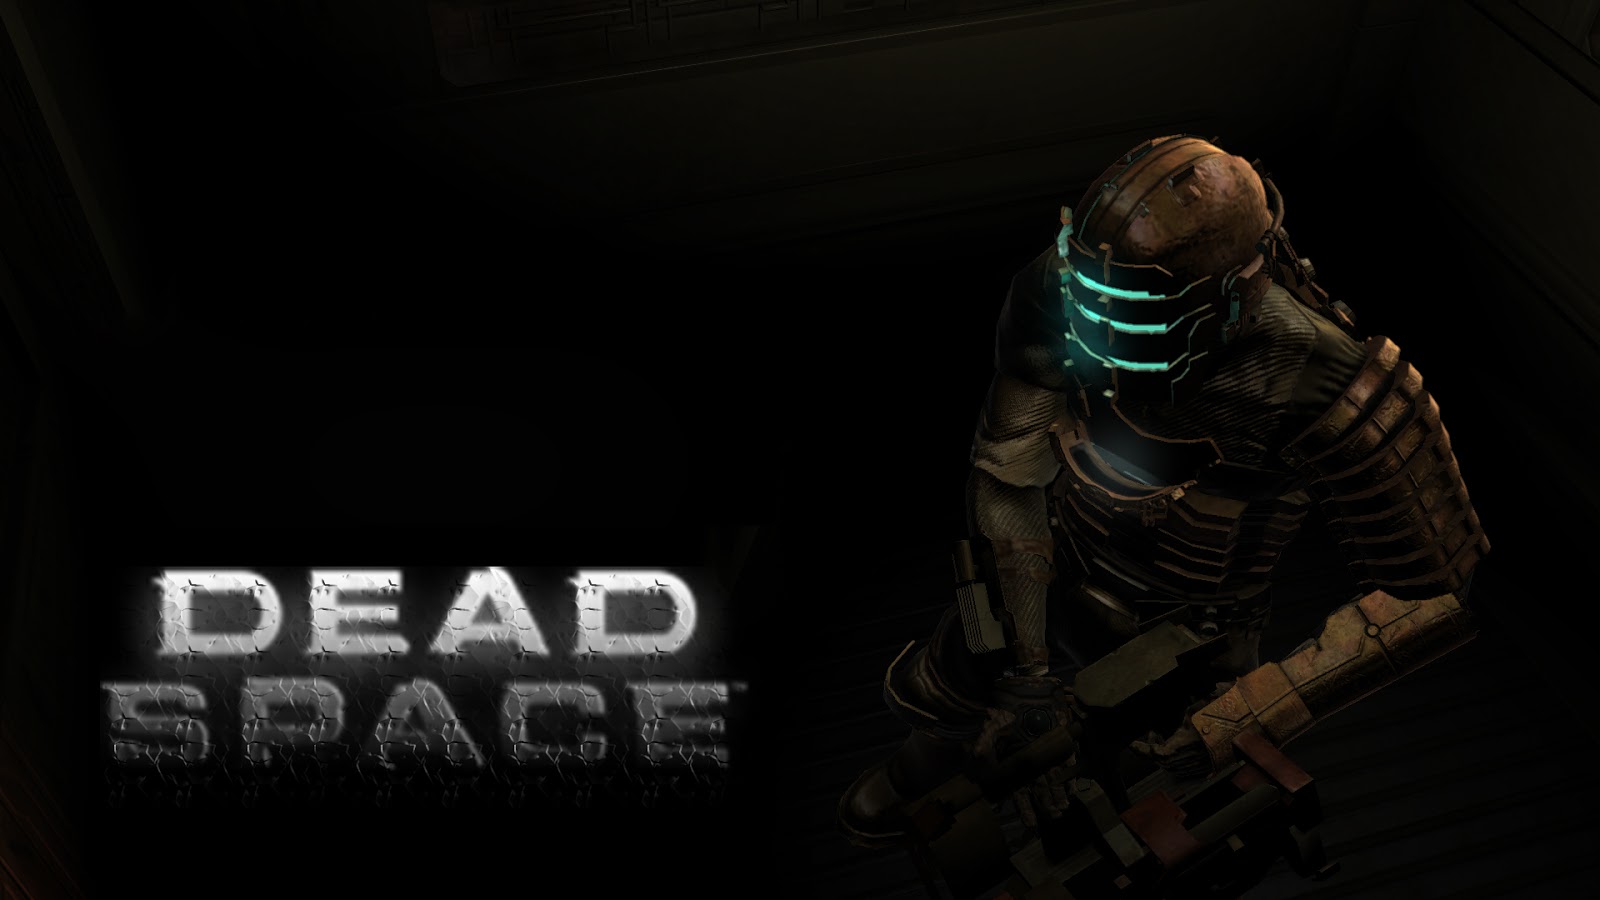 Dead Space HD Wallpaper For Desktop Mobile And Tablet